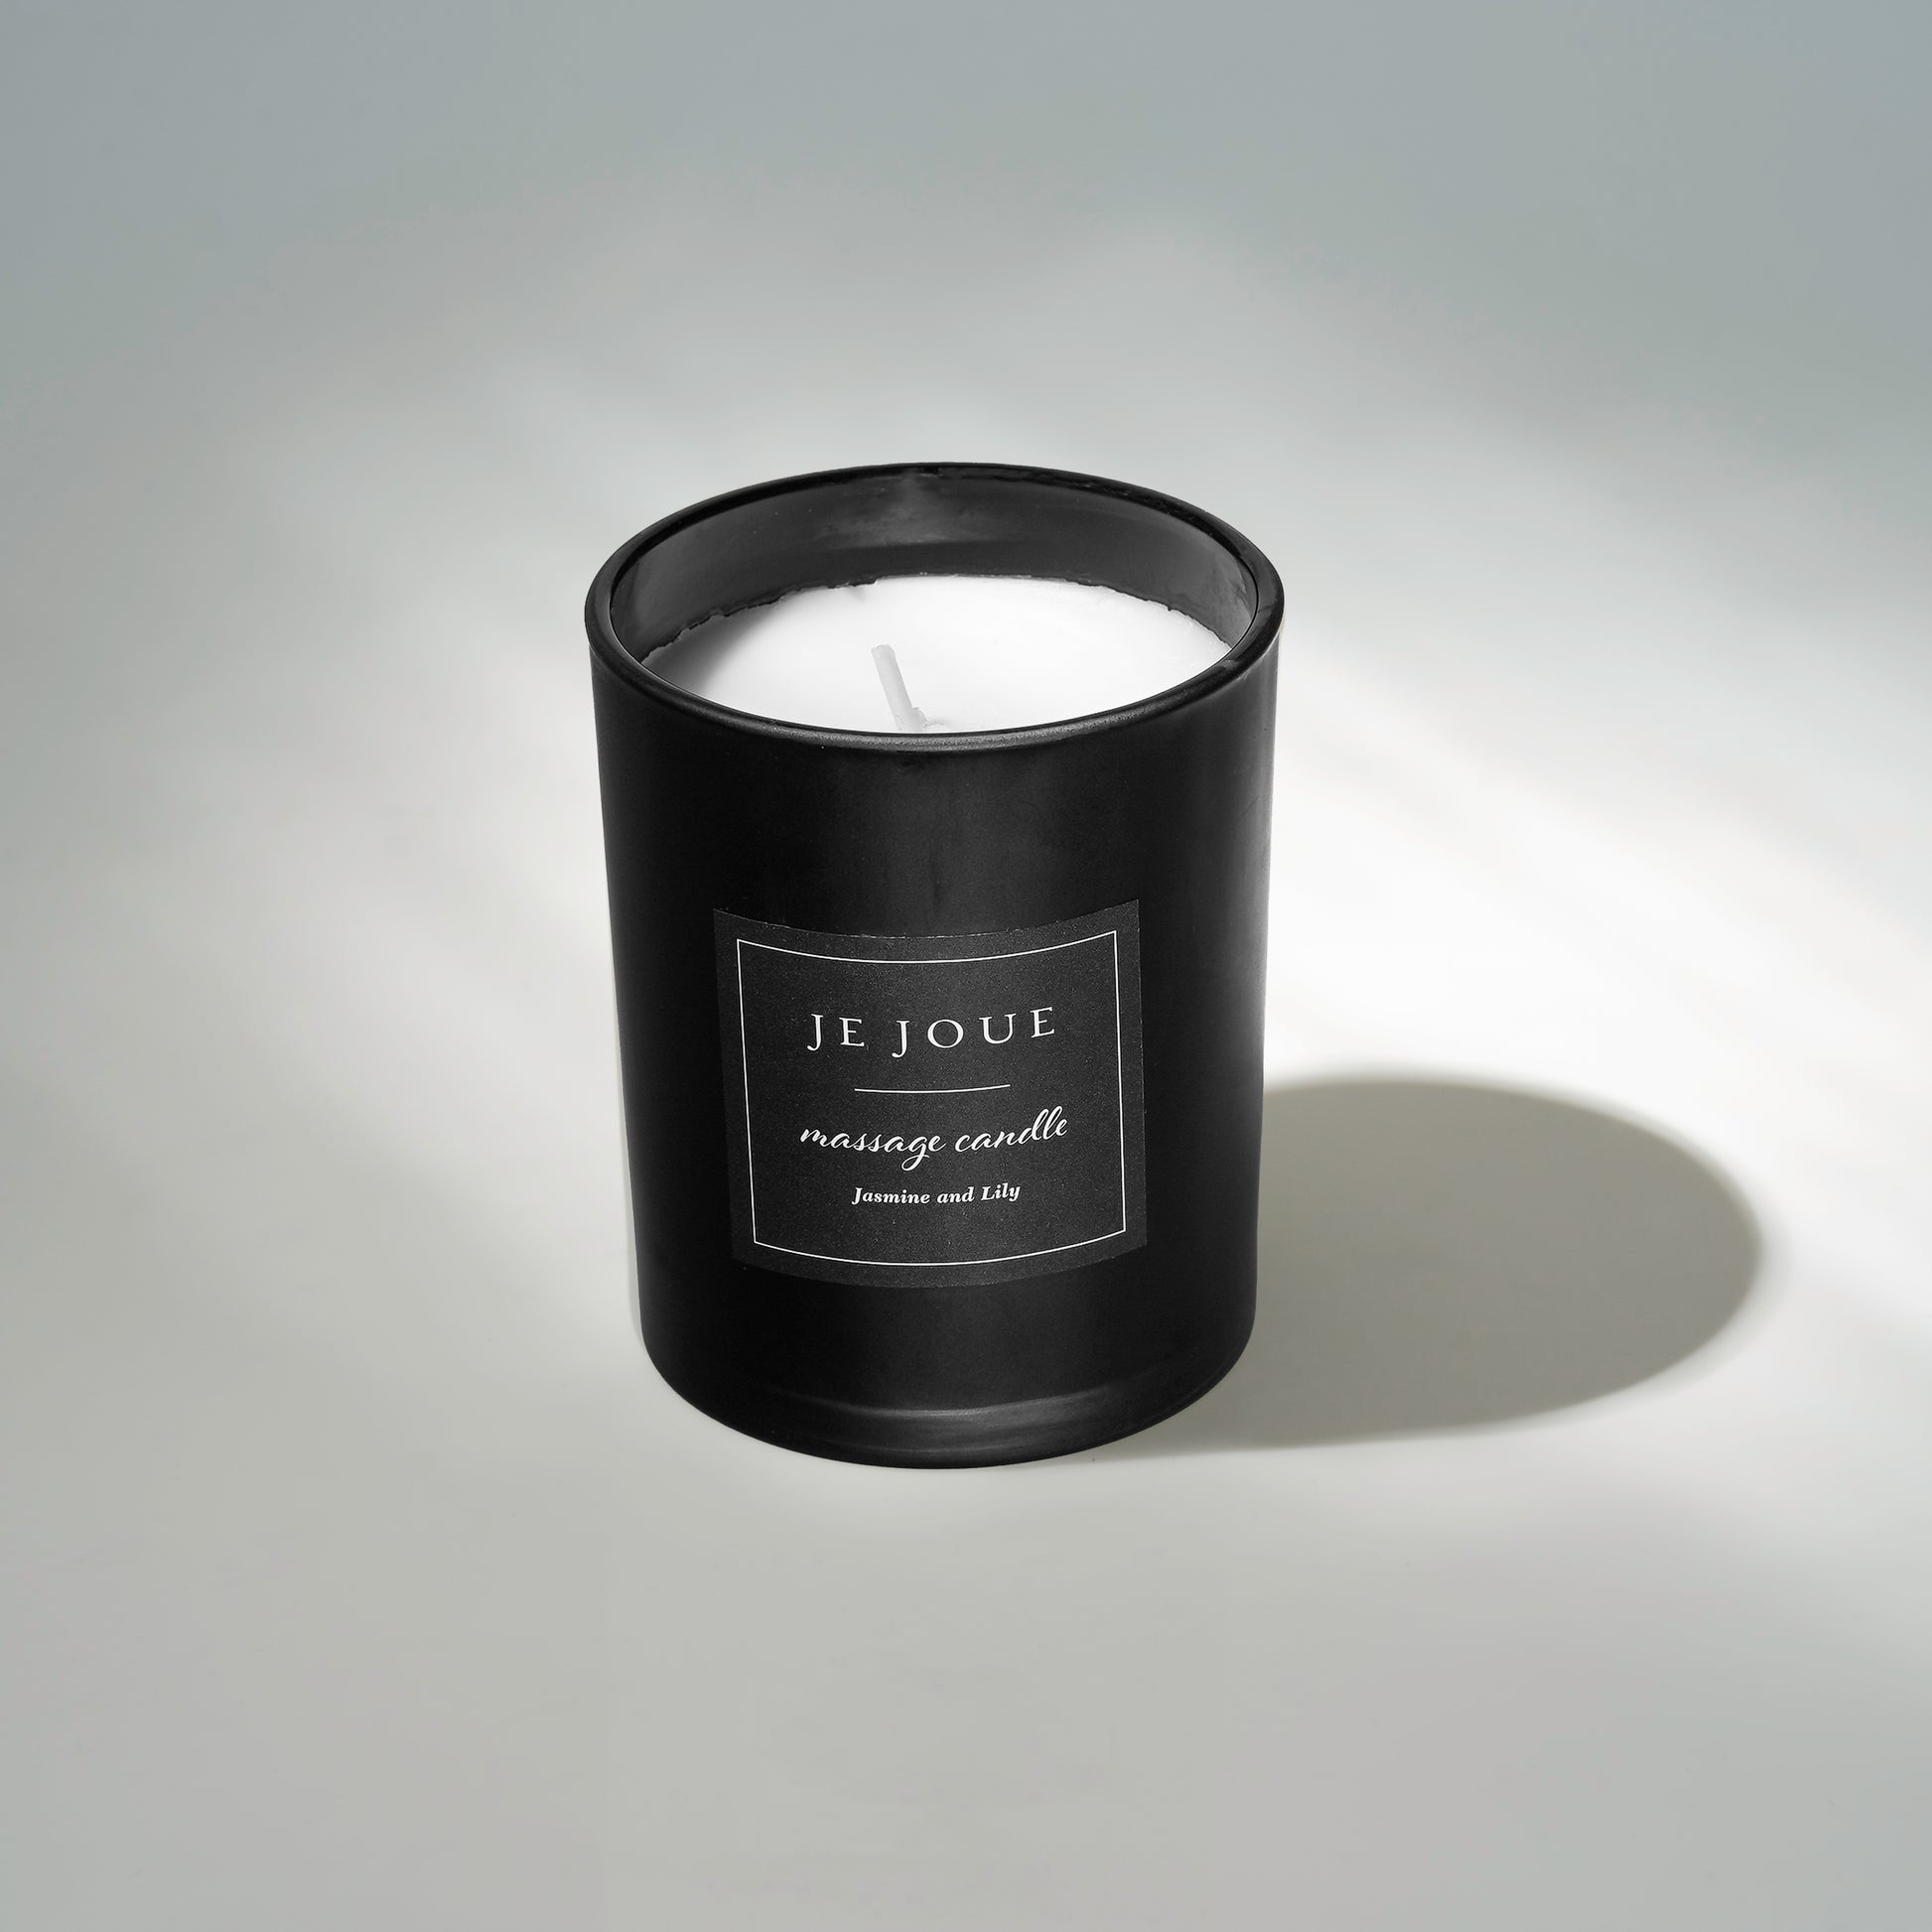 Je Joue Massage Candle with shadow